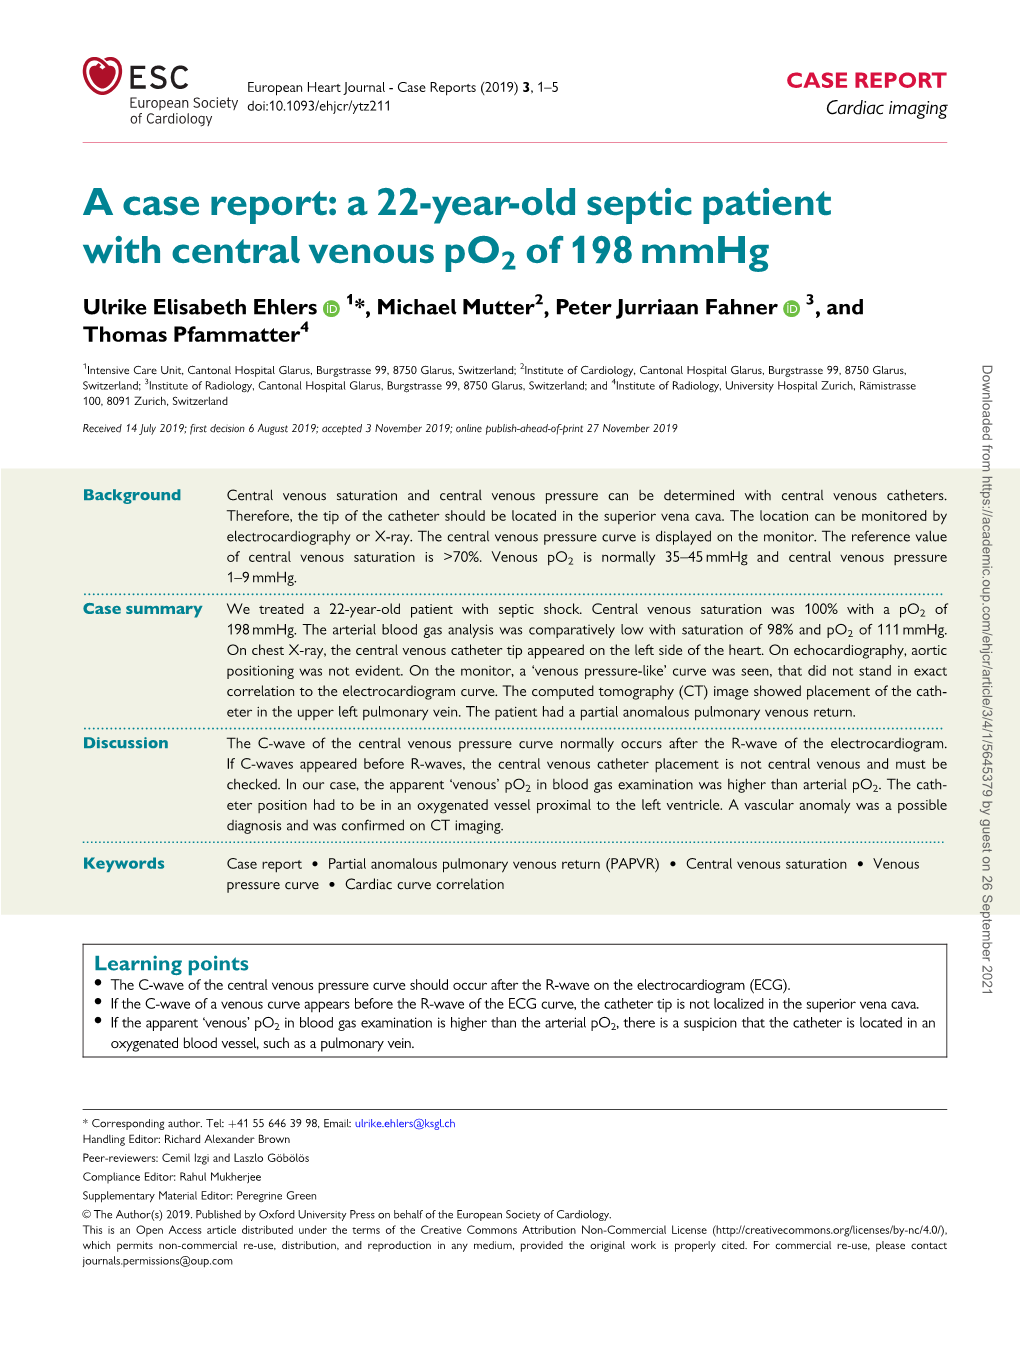 A 22-Year-Old Septic Patient with Central Venous Po2 of 198 Mmhg